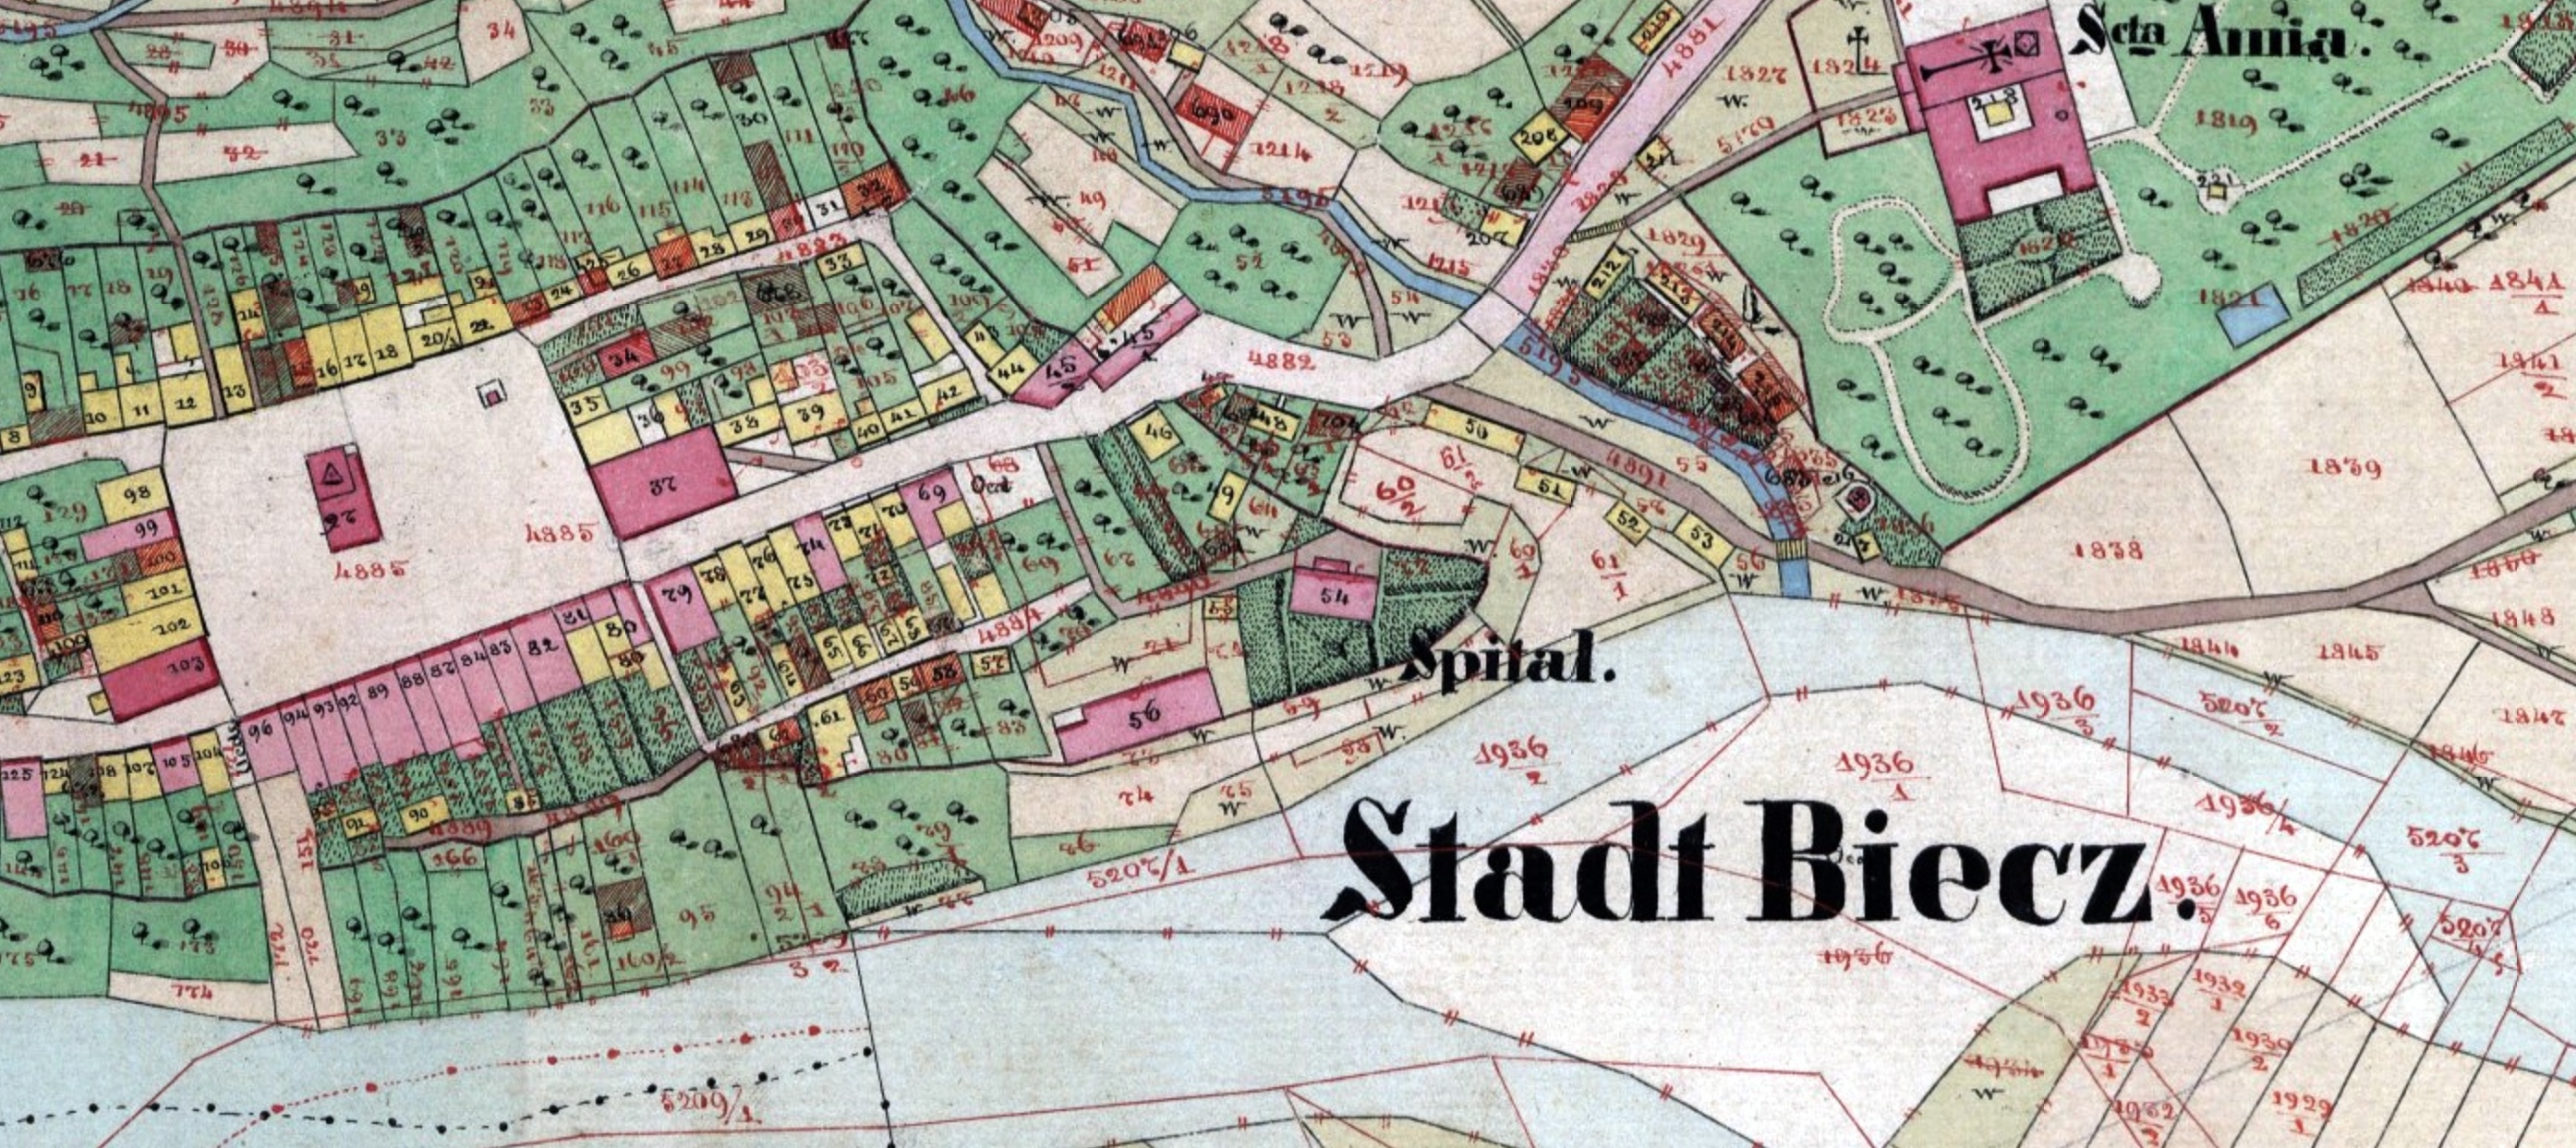 the 1850 cadastral map of Biecz